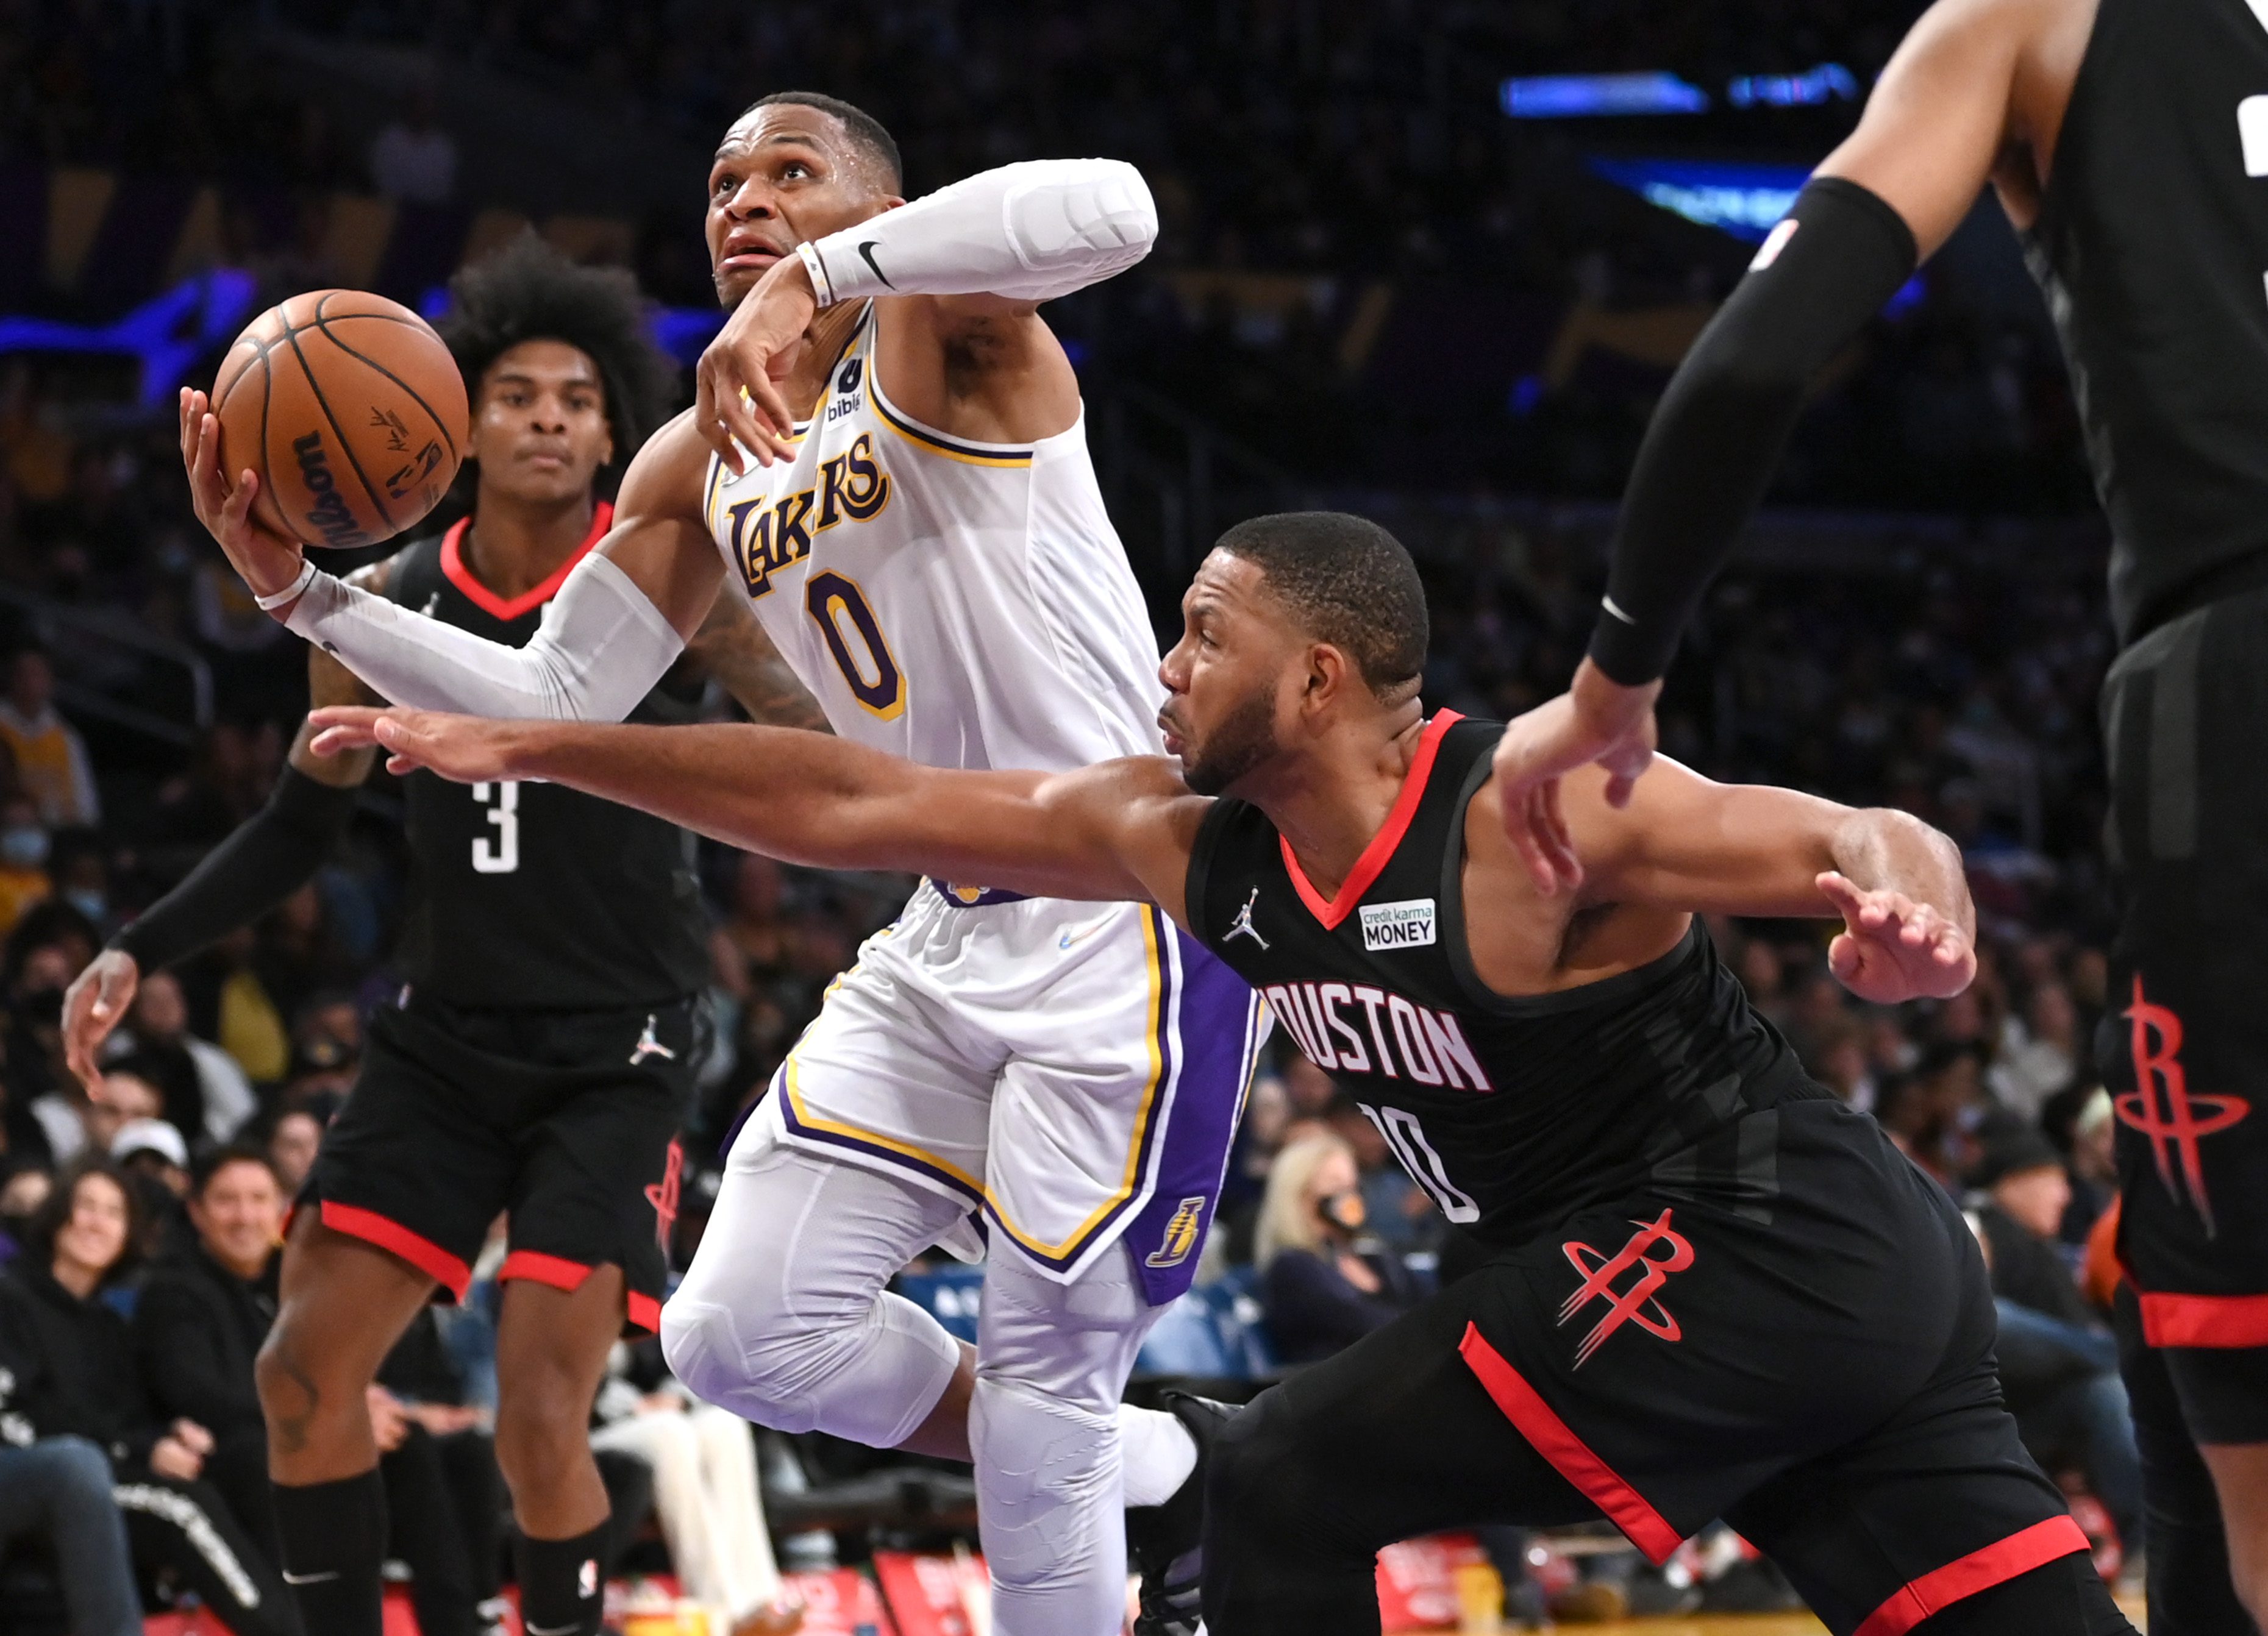 Lakers overwhelm young Rockets in dominant win